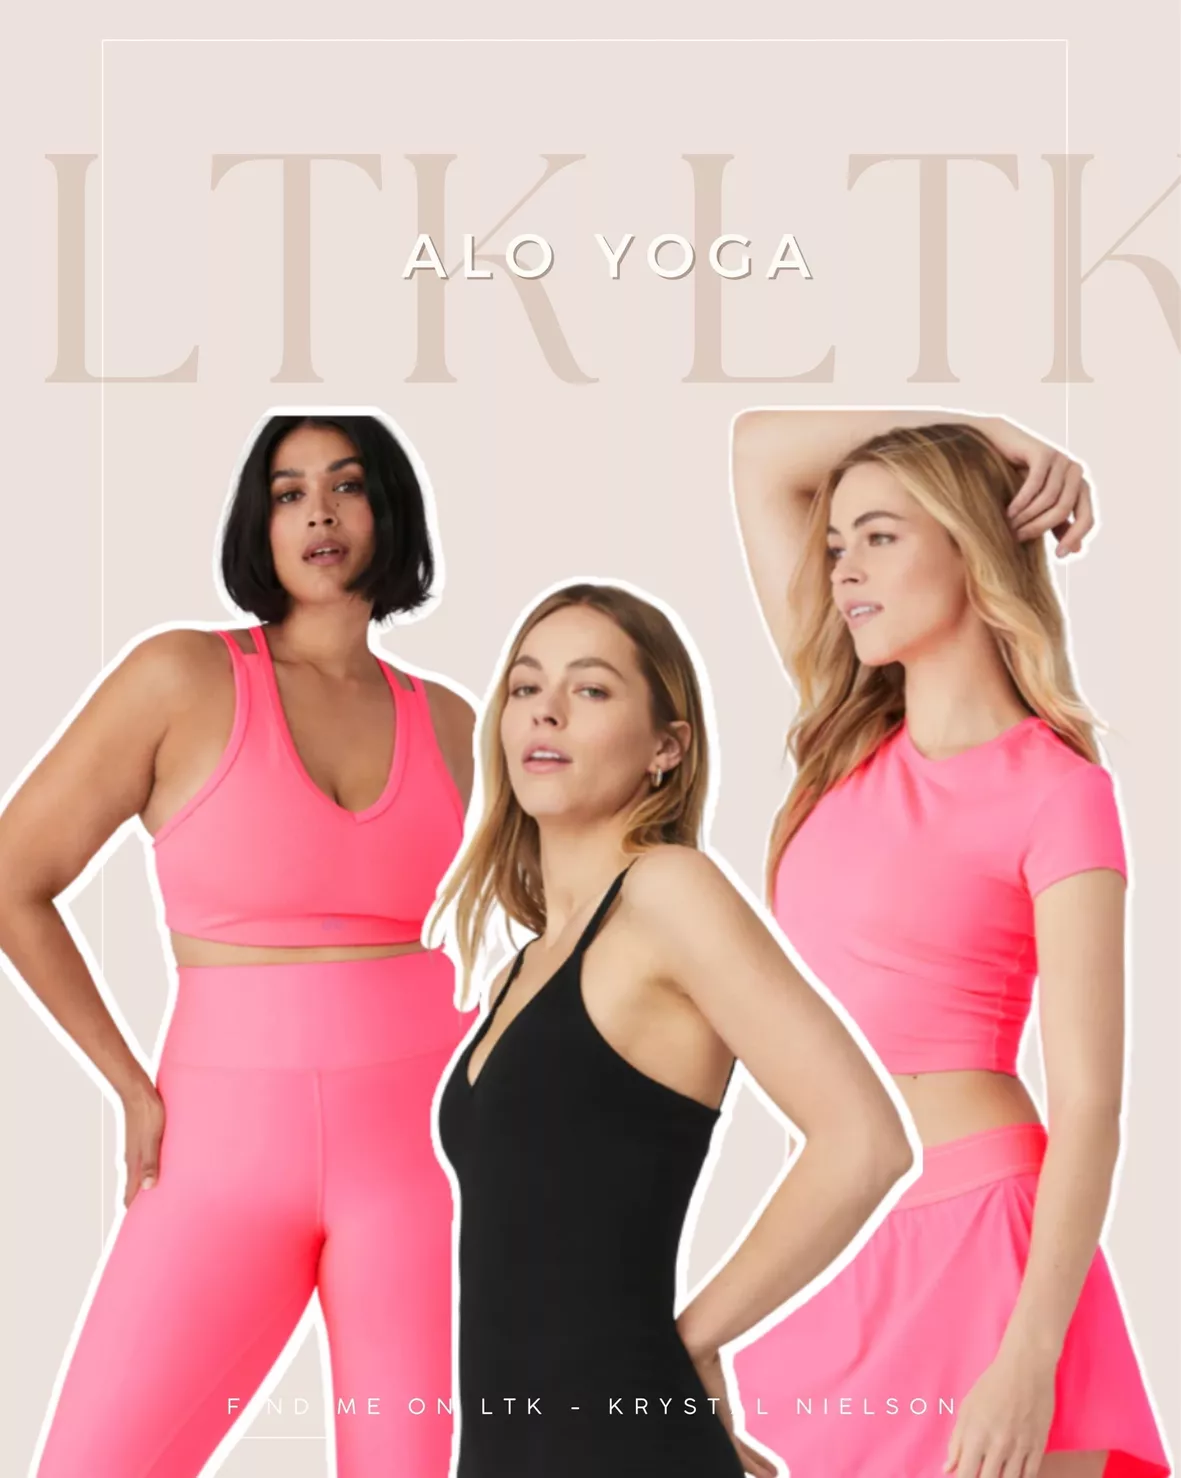 Alo Airlift High-Waist Suit Up Legging & Airlift Suit Up Bra Set, Alo Has  a Bunch of Cute Sets You Can Both Work Out and Lounge In